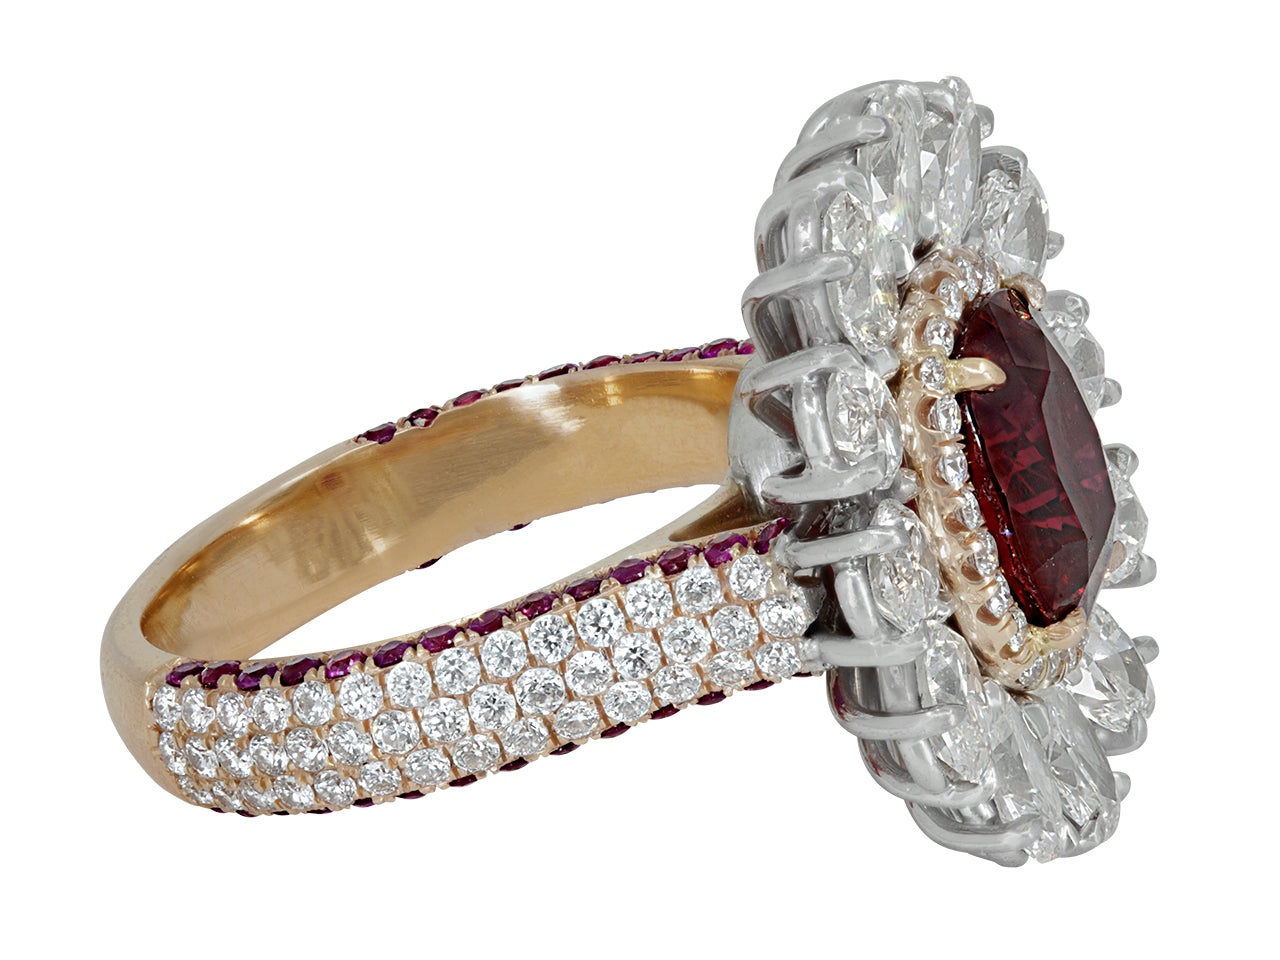 Natural Thai Ruby, 2.13 Carat, and Diamond Floral Ring in 18K